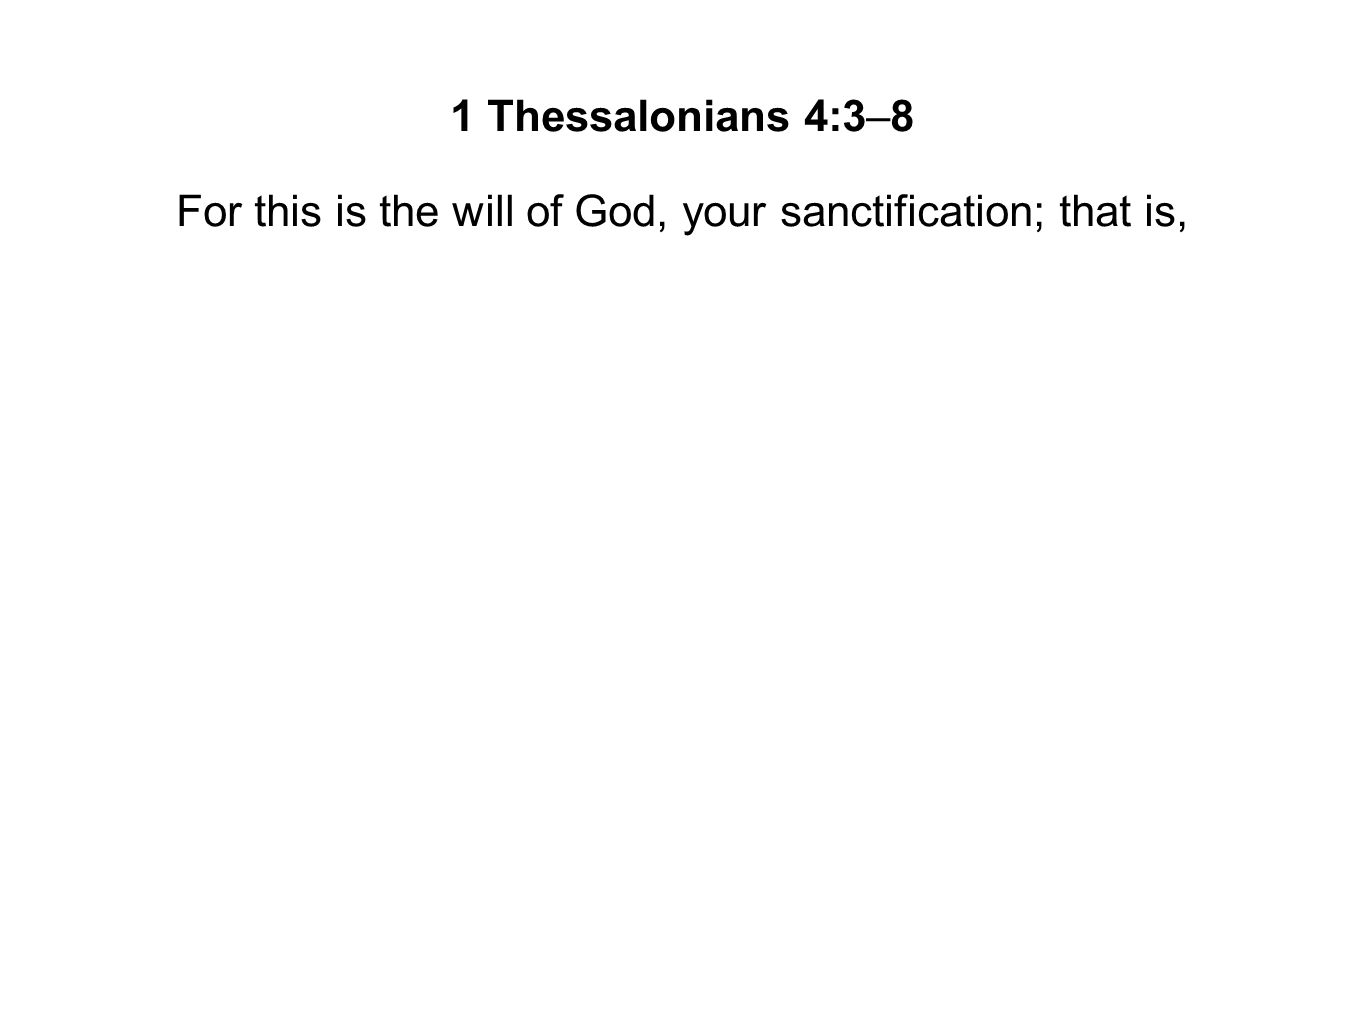 For this is the will of God, your sanctification; that is,